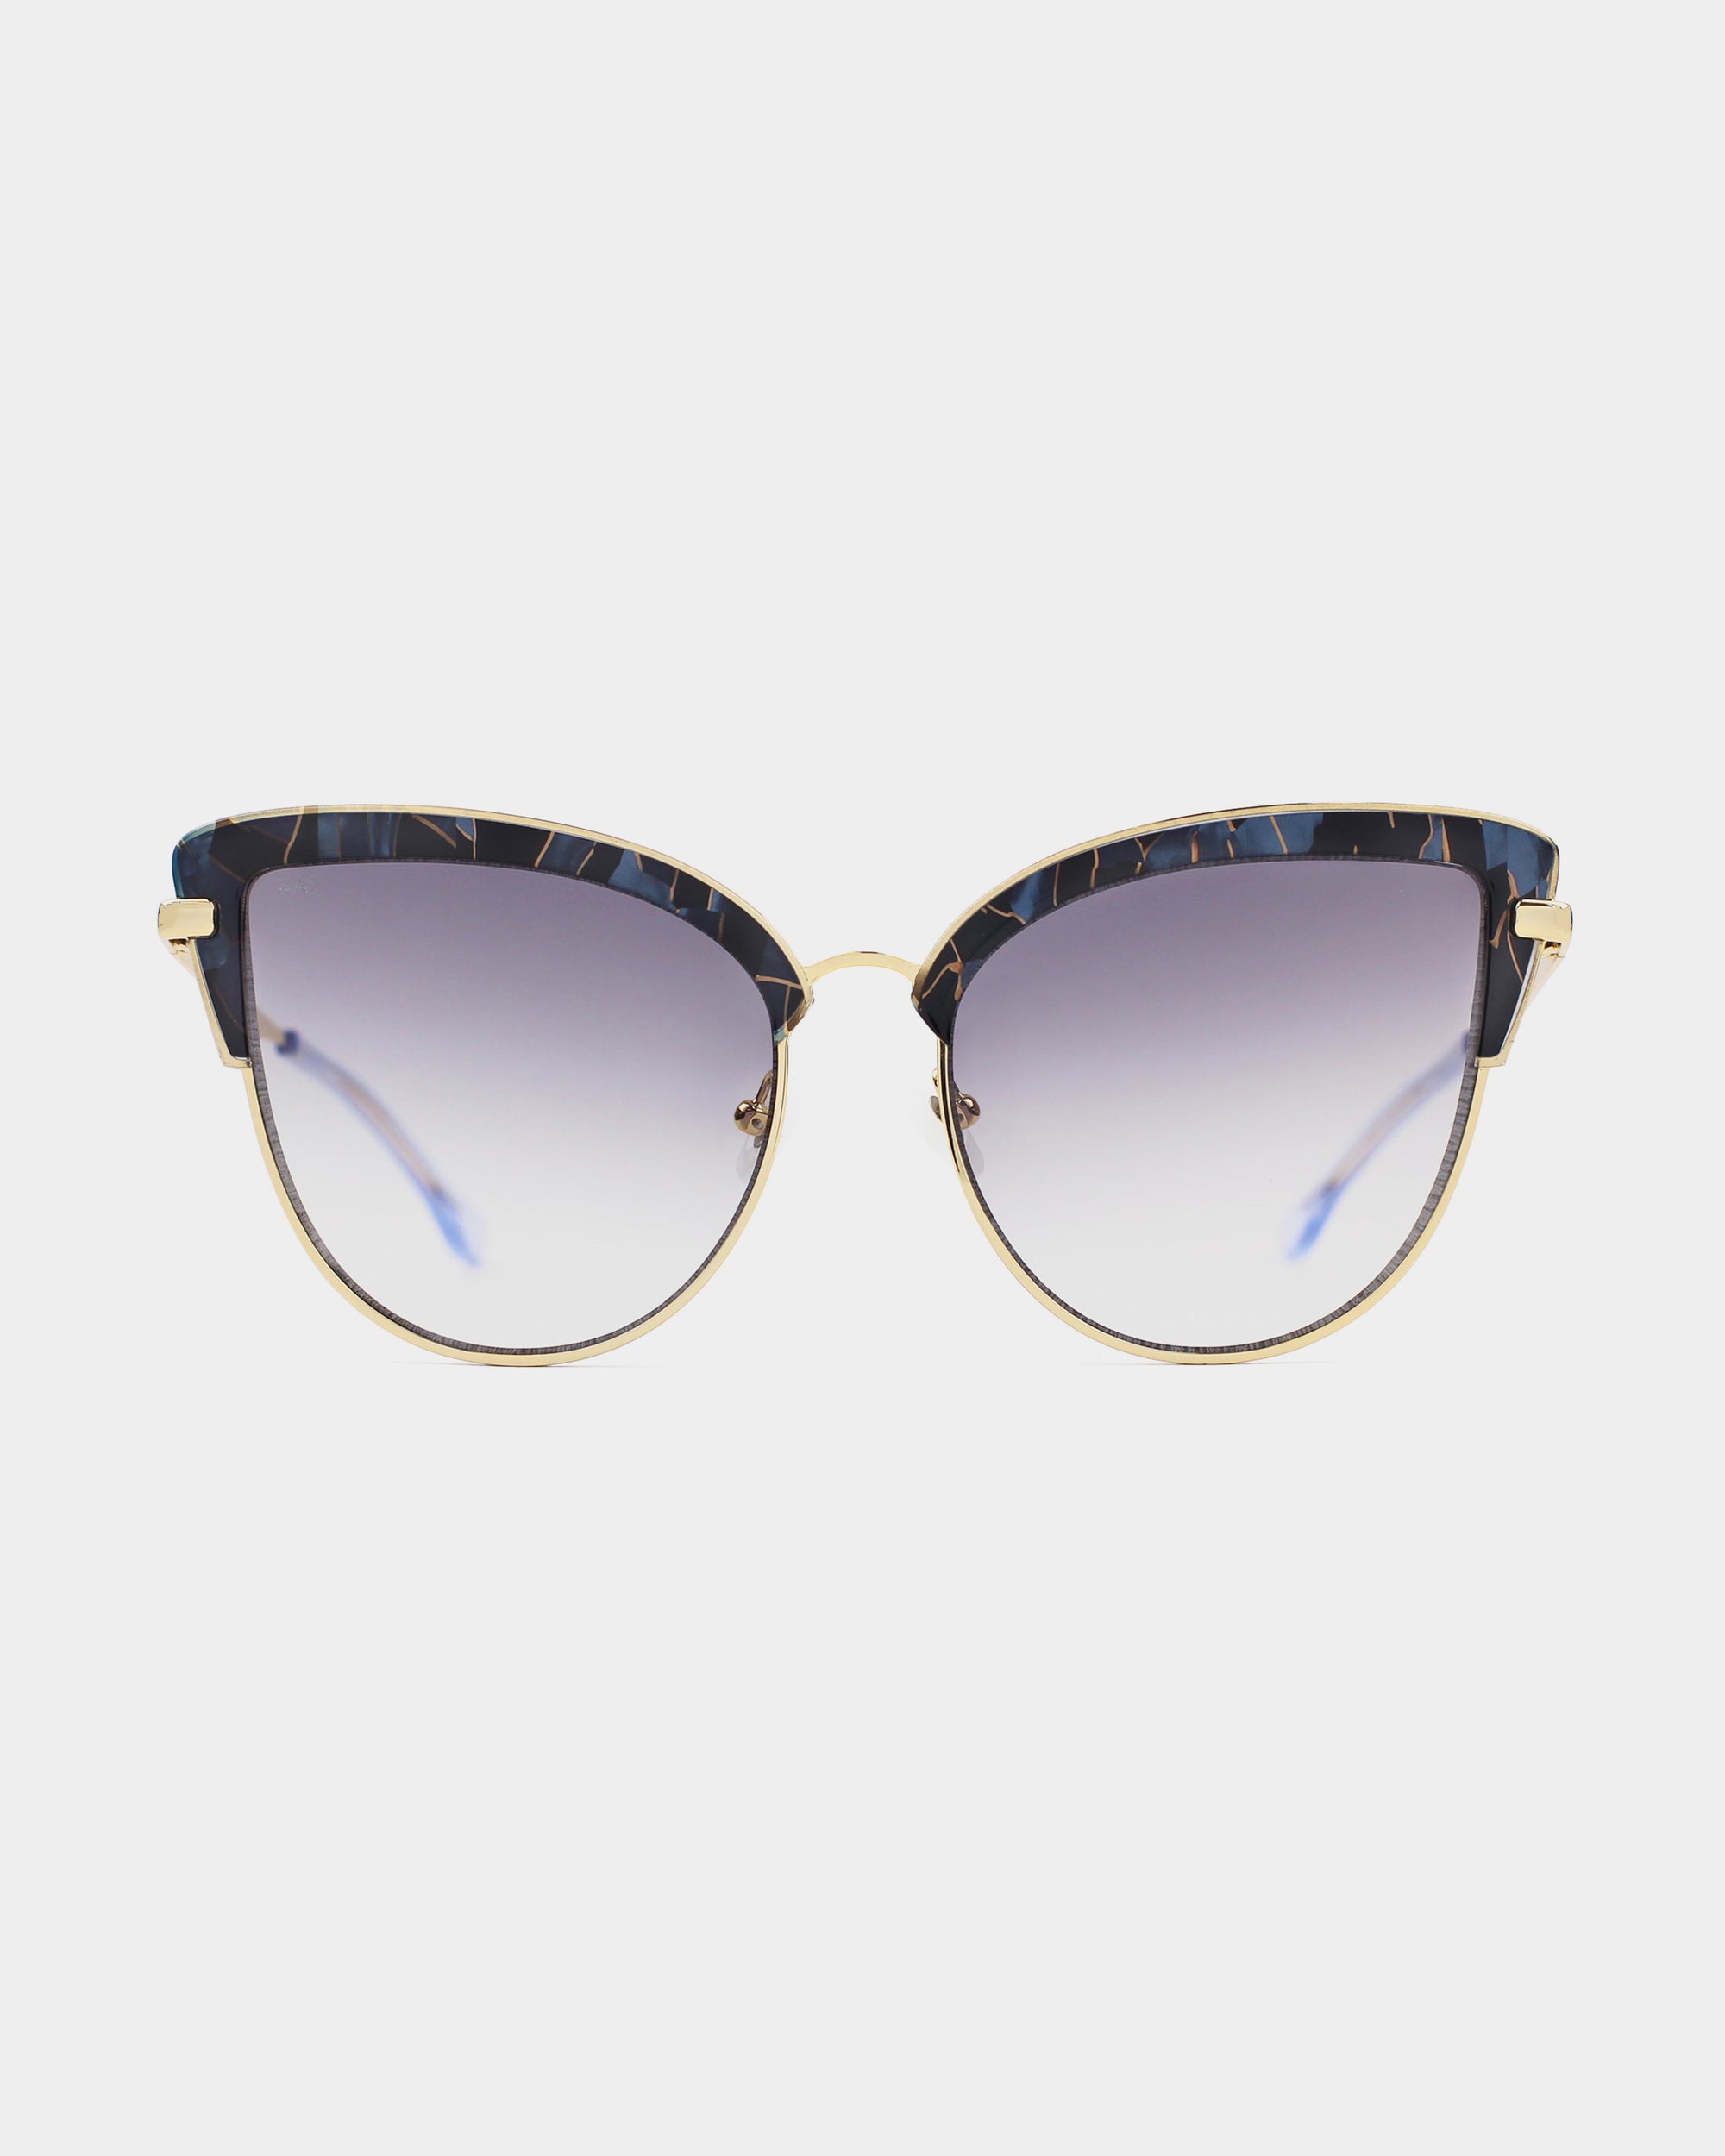 A pair of oversized cat-eye sunglasses with gradient lenses and a sleek design. The stainless steel frames are gold with dark, speckled top rims. The temples are thin and also gold, providing 100% UV protection and giving the Venus sunglasses by For Art&#39;s Sake® a stylish and sophisticated look.